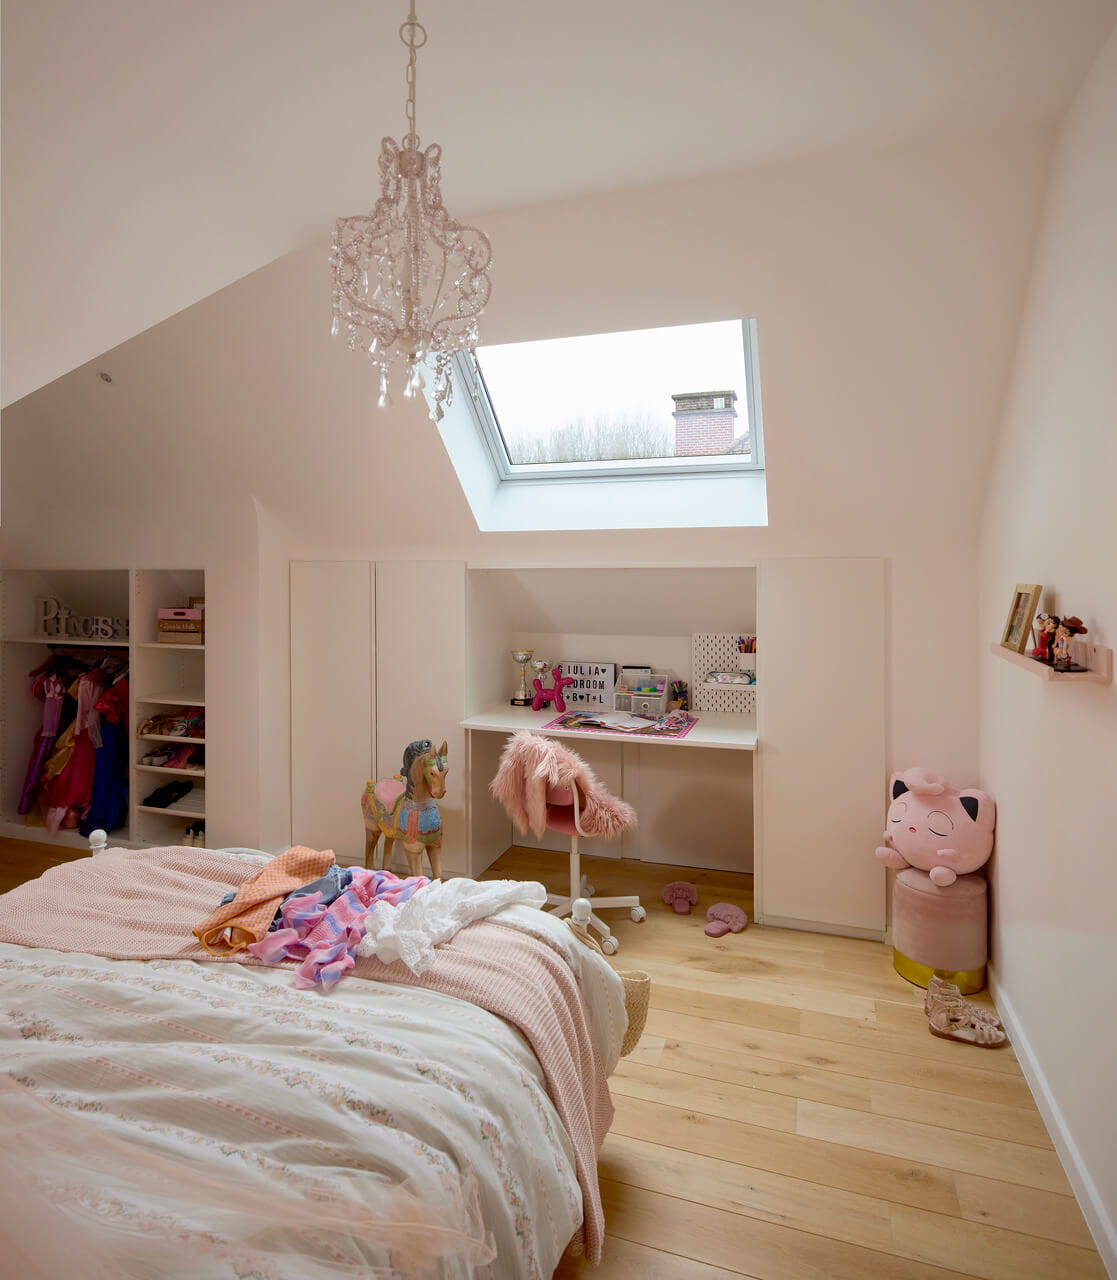 A pastel coloured kids room in the attic with a roof window.